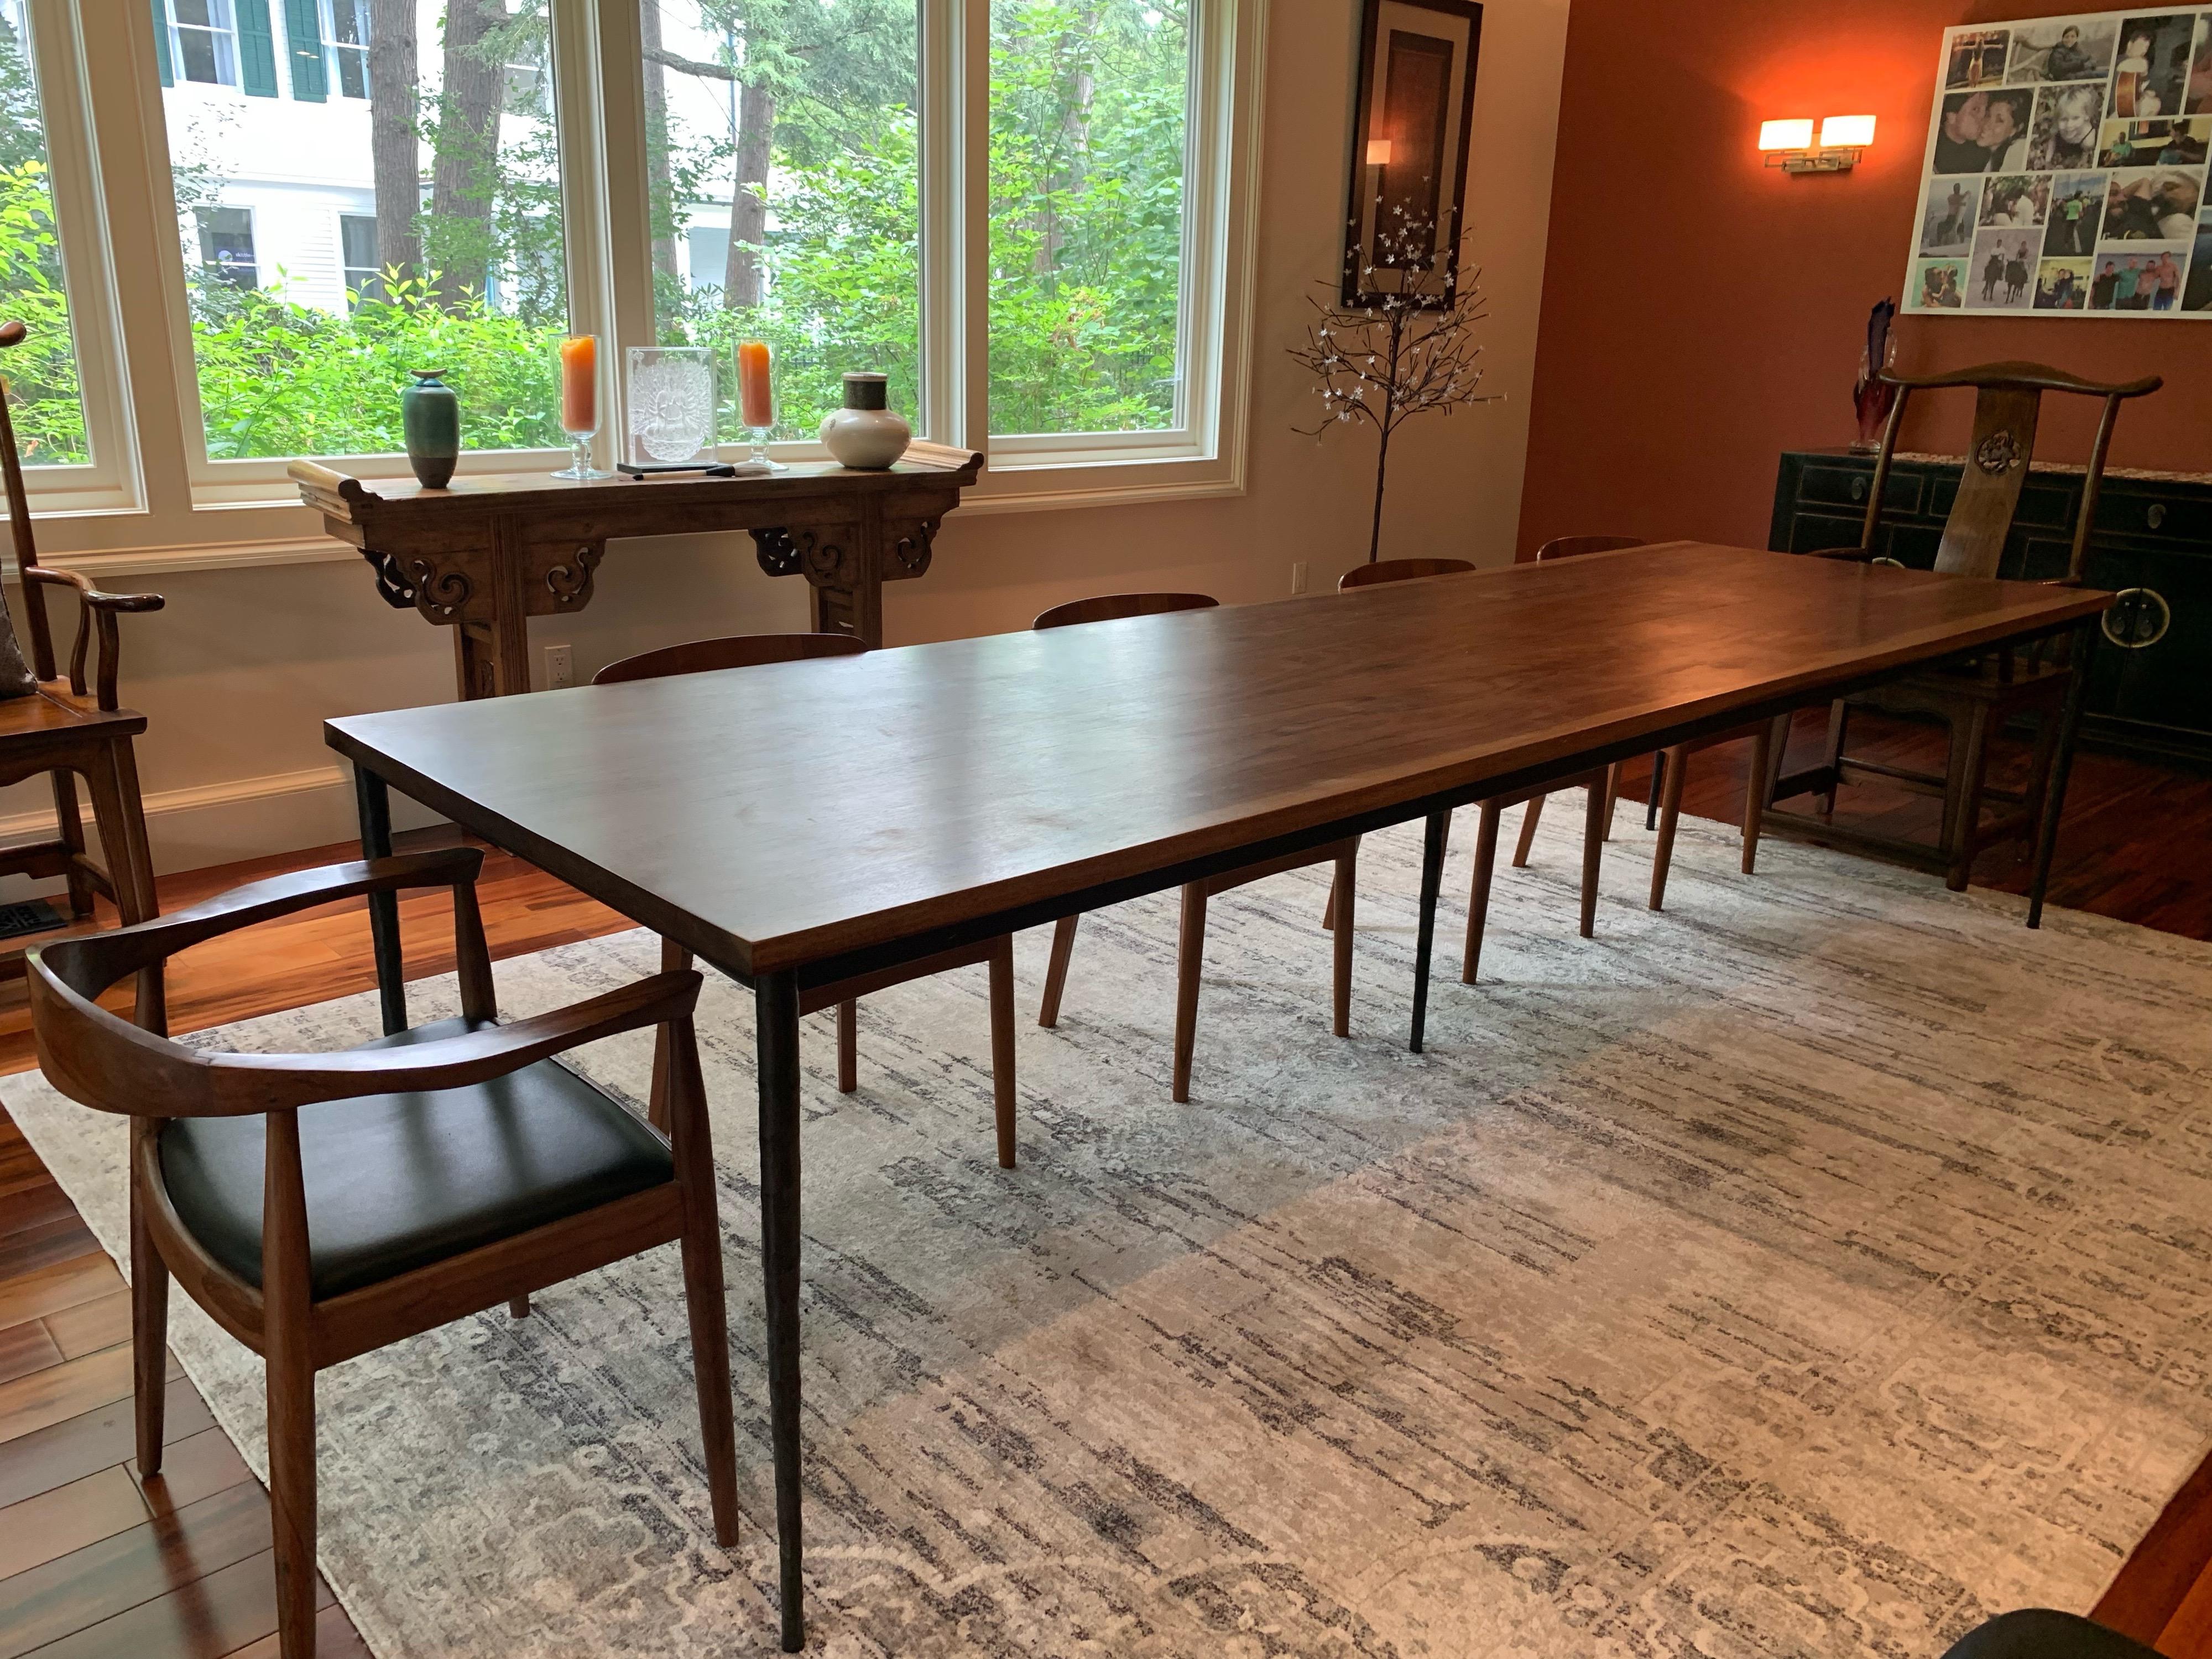 Custom-made Brazilian walnut & steel hammered leg long dining table from ABC Carpet & Home
Steel Hammered legs give a beautiful contemporary look. The Brazilian Walnut grains are exhibited so beautifully in this extra long table. Light use, very